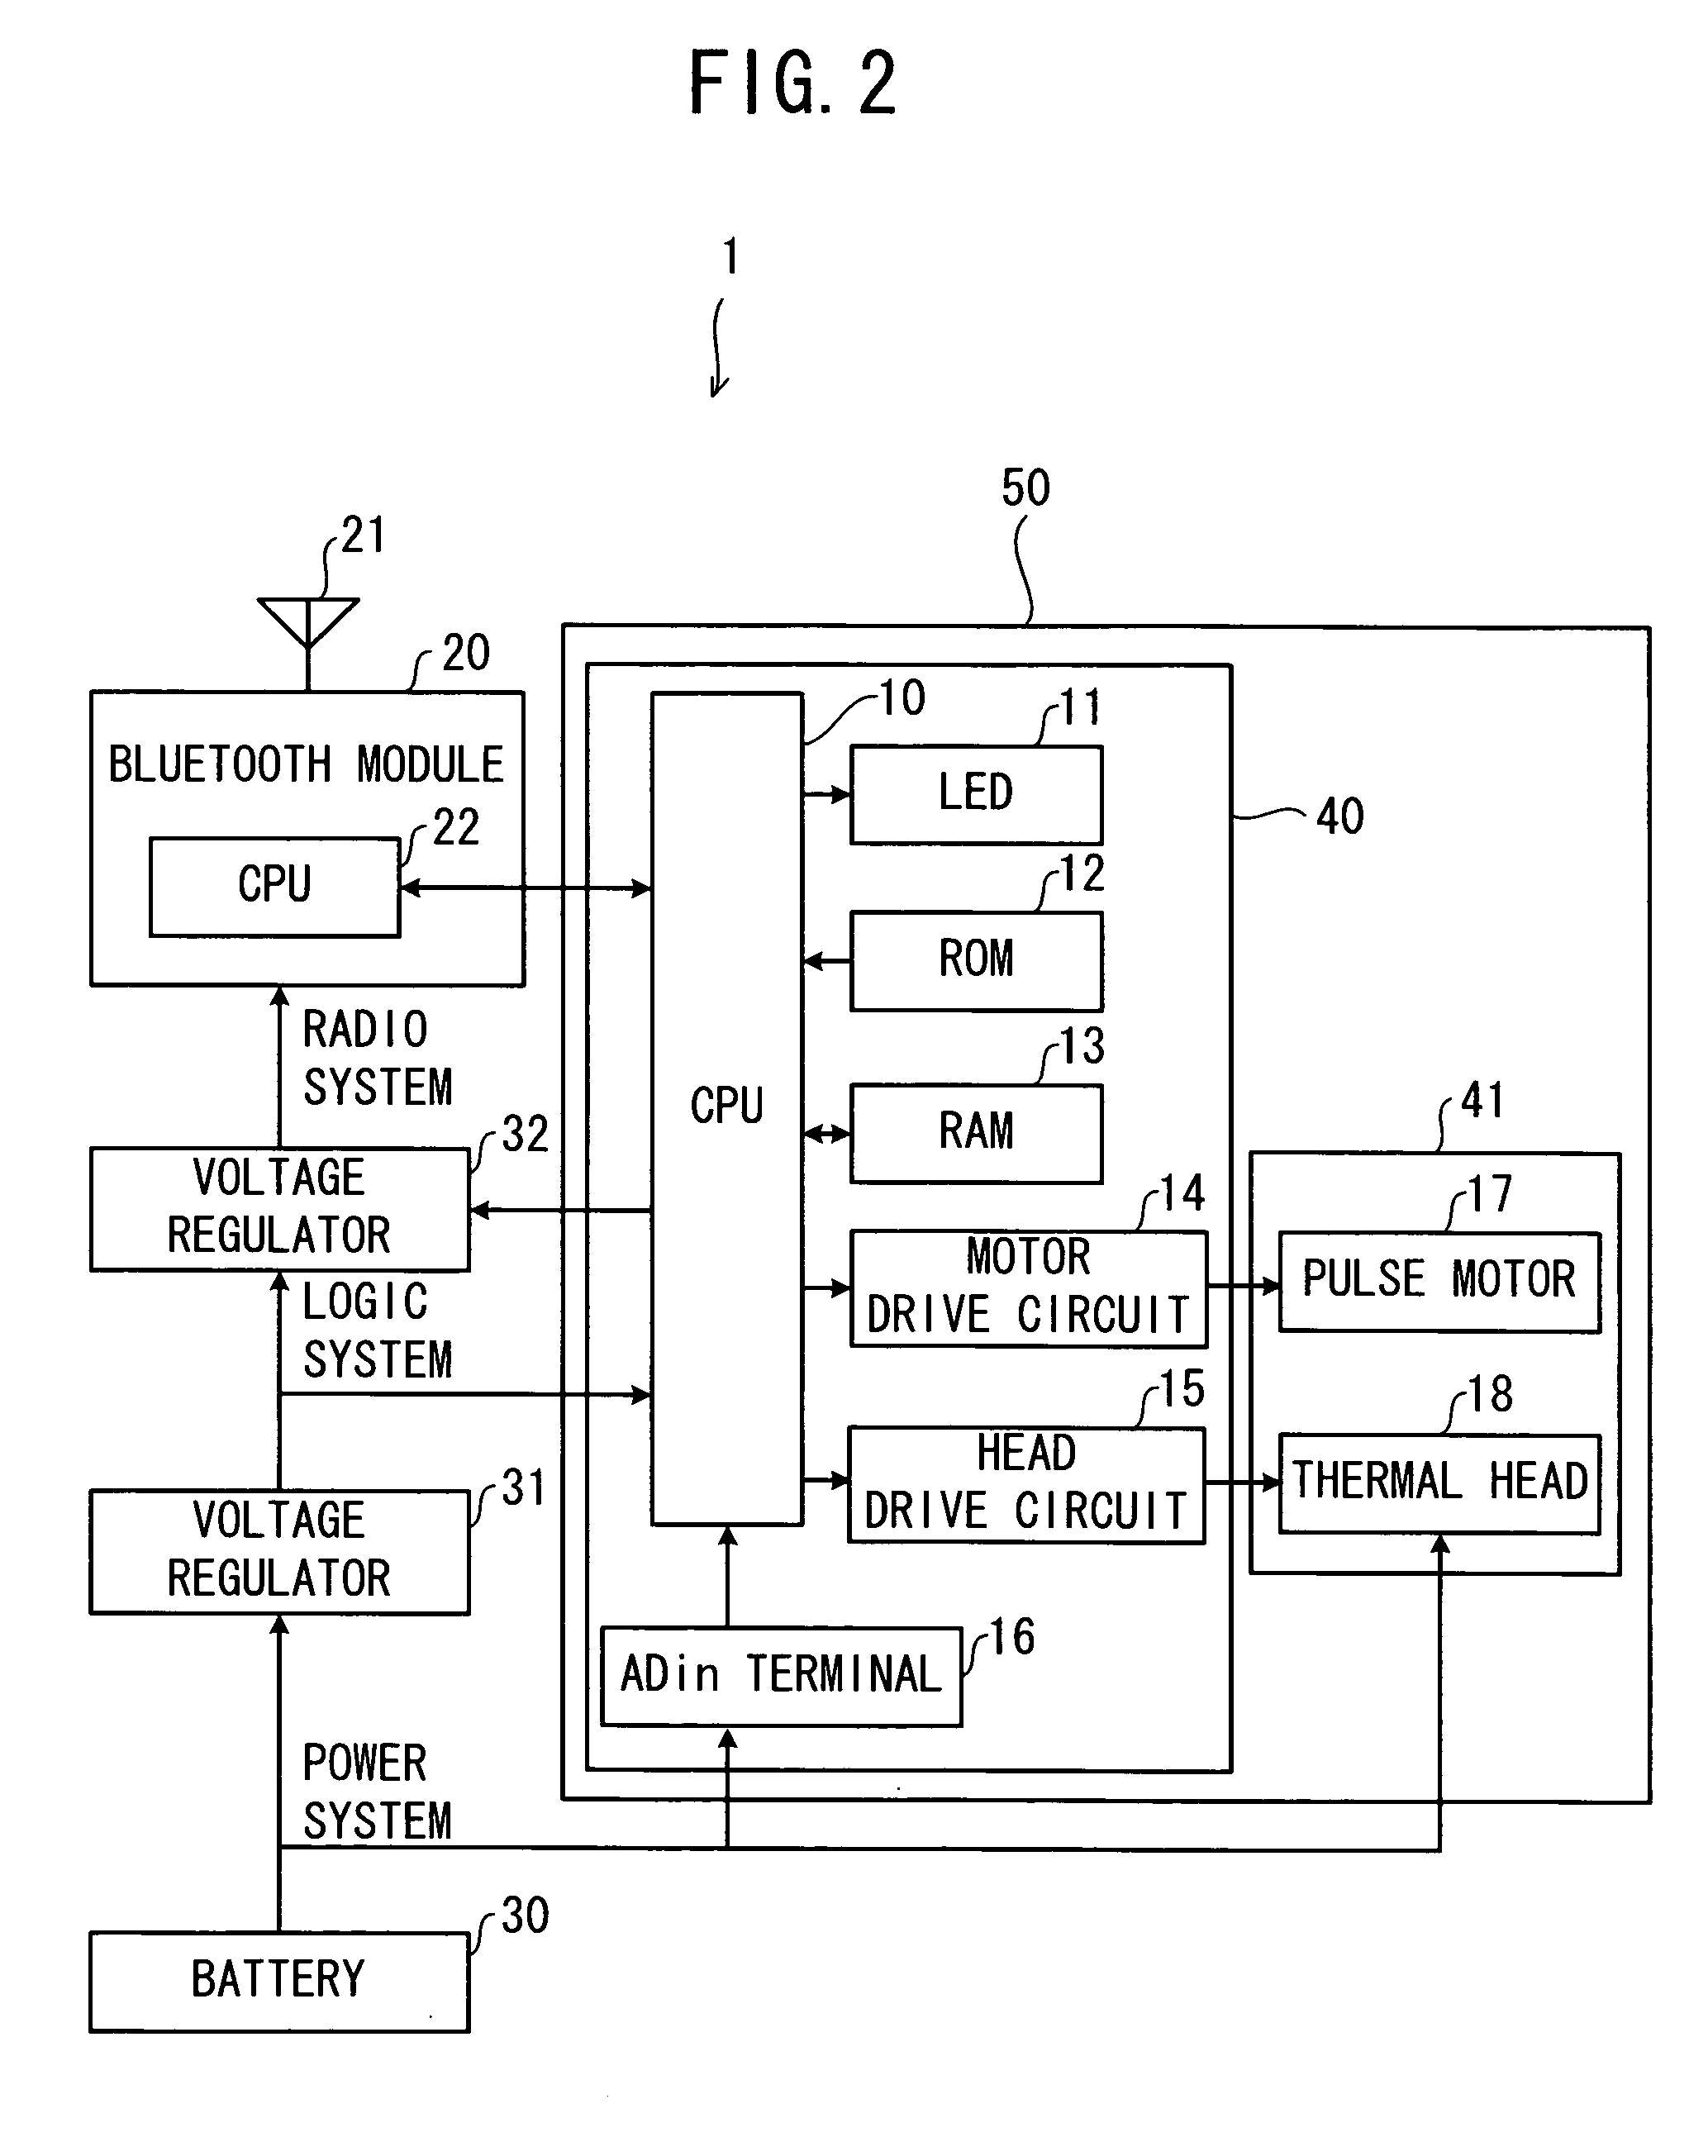 Electronic apparatus that conserves power